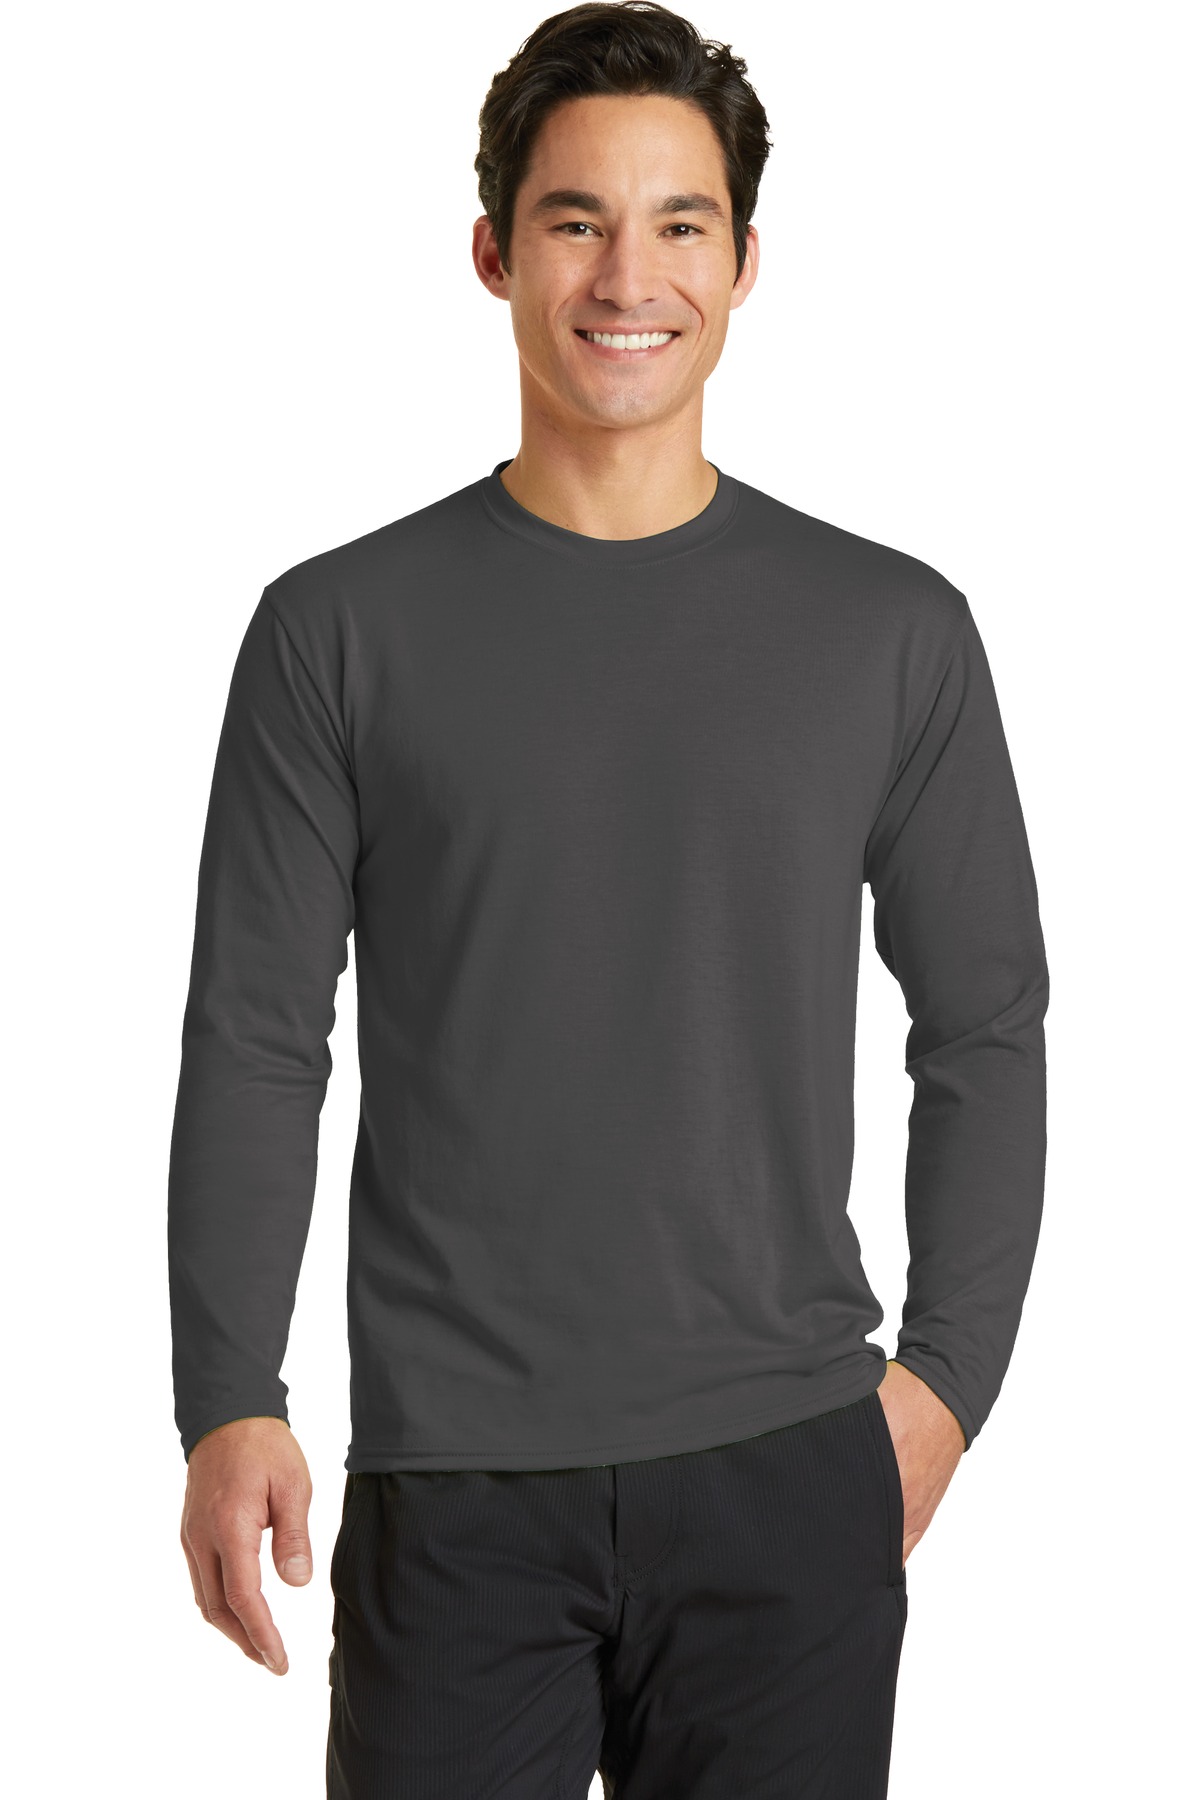 Front view of Long Sleeve Performance Blend Tee